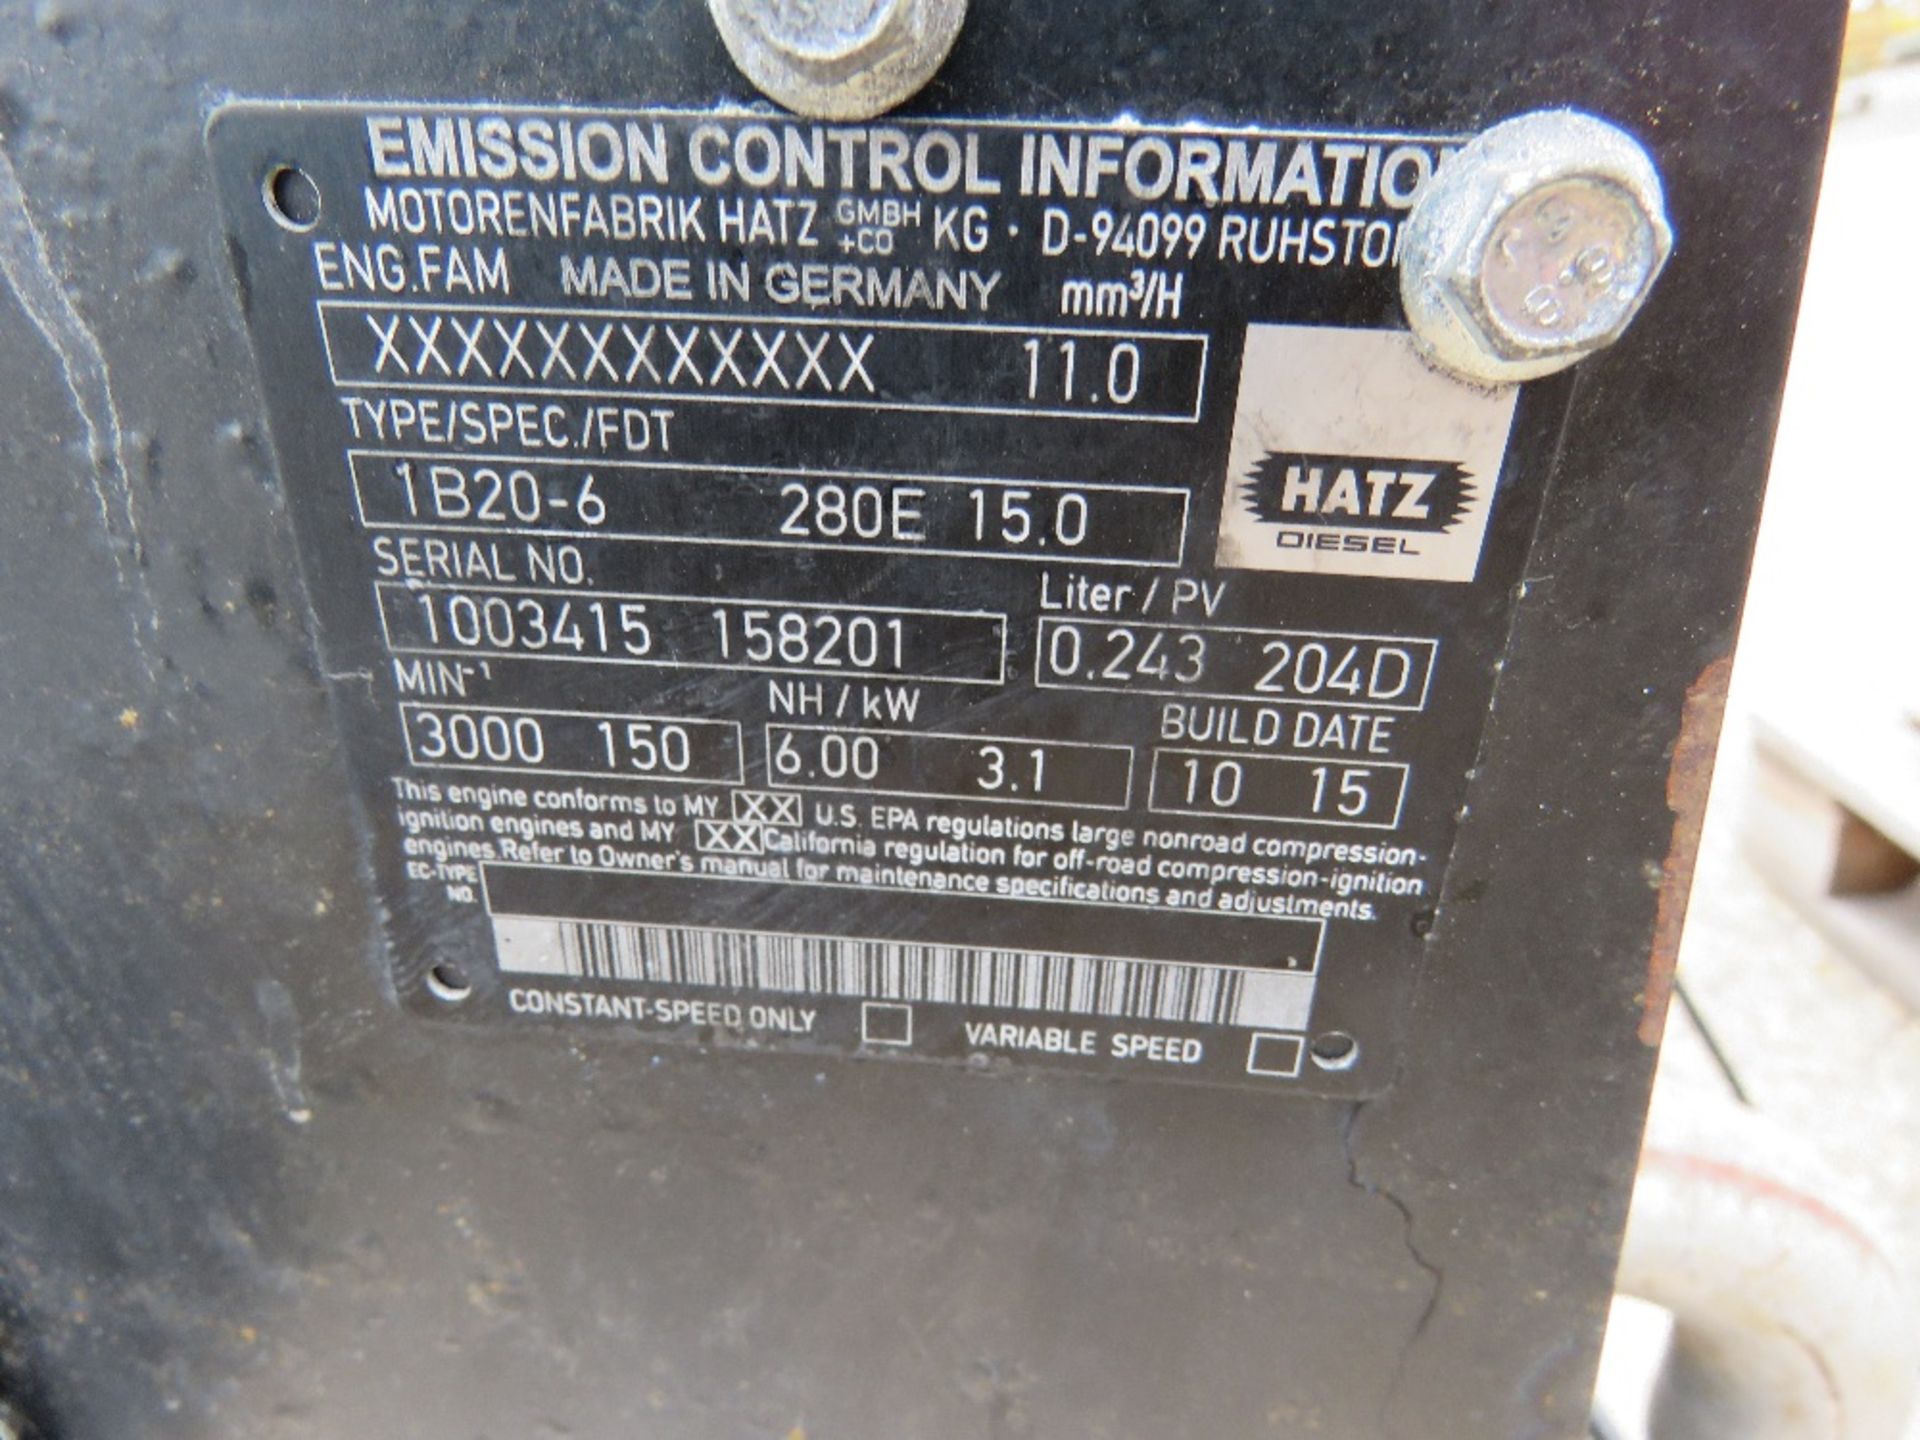 HATZ DIESEL ENGINED PACKAGED GENERATOR SET WITH CONTROL UNIT, 3.1KW RATED OUTPUT. - Image 5 of 5